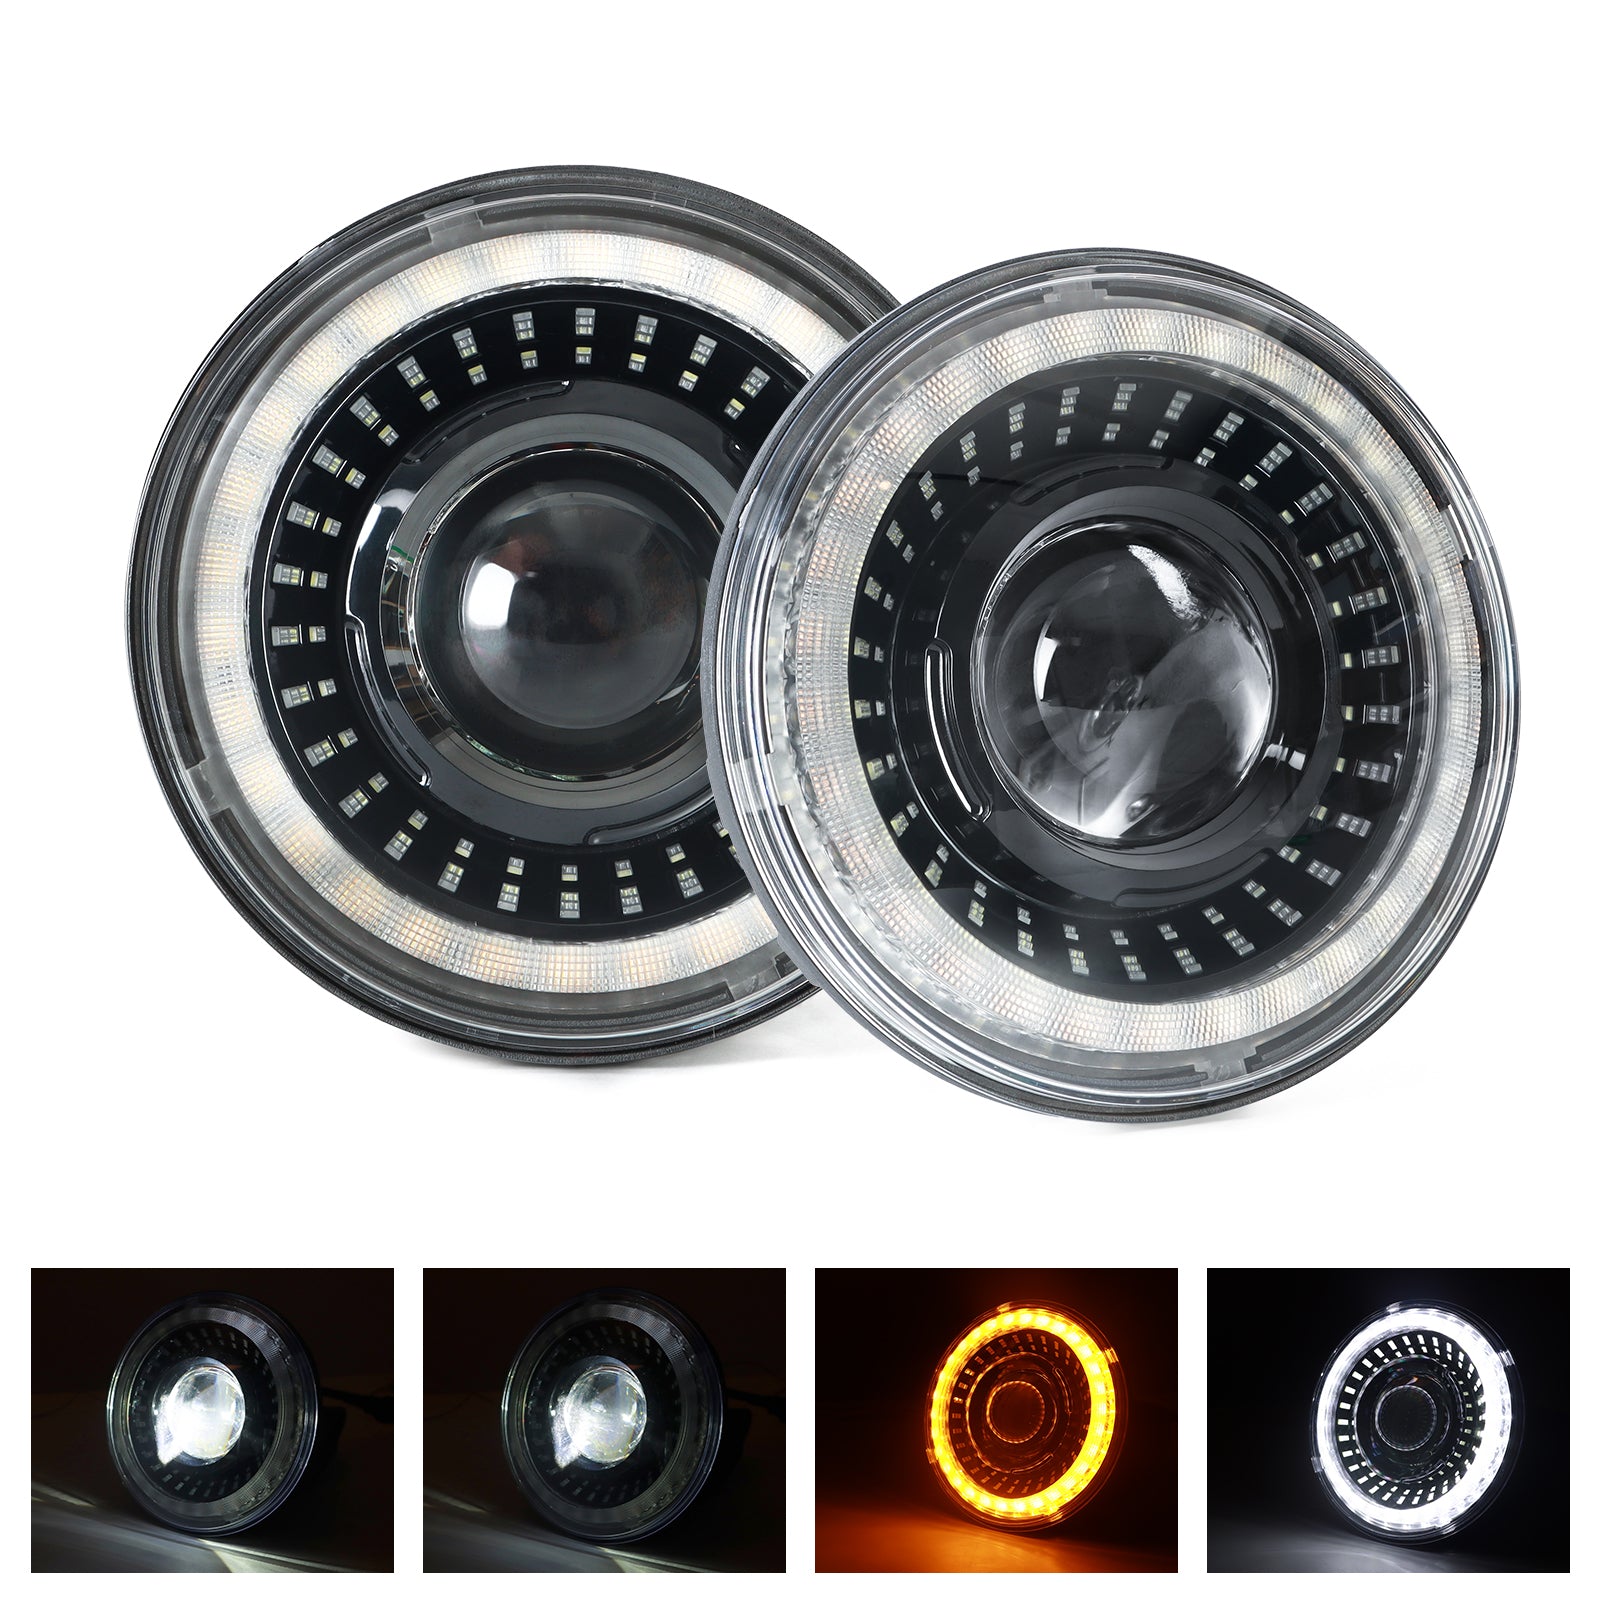 7 Inch LED Headlights for JK JKU TJ LJ, Round LED Headlights with DRL High Low Beam and turn signal compatible with Wrangler JK TJ LJ 2PCS With H4 H13 Adapter